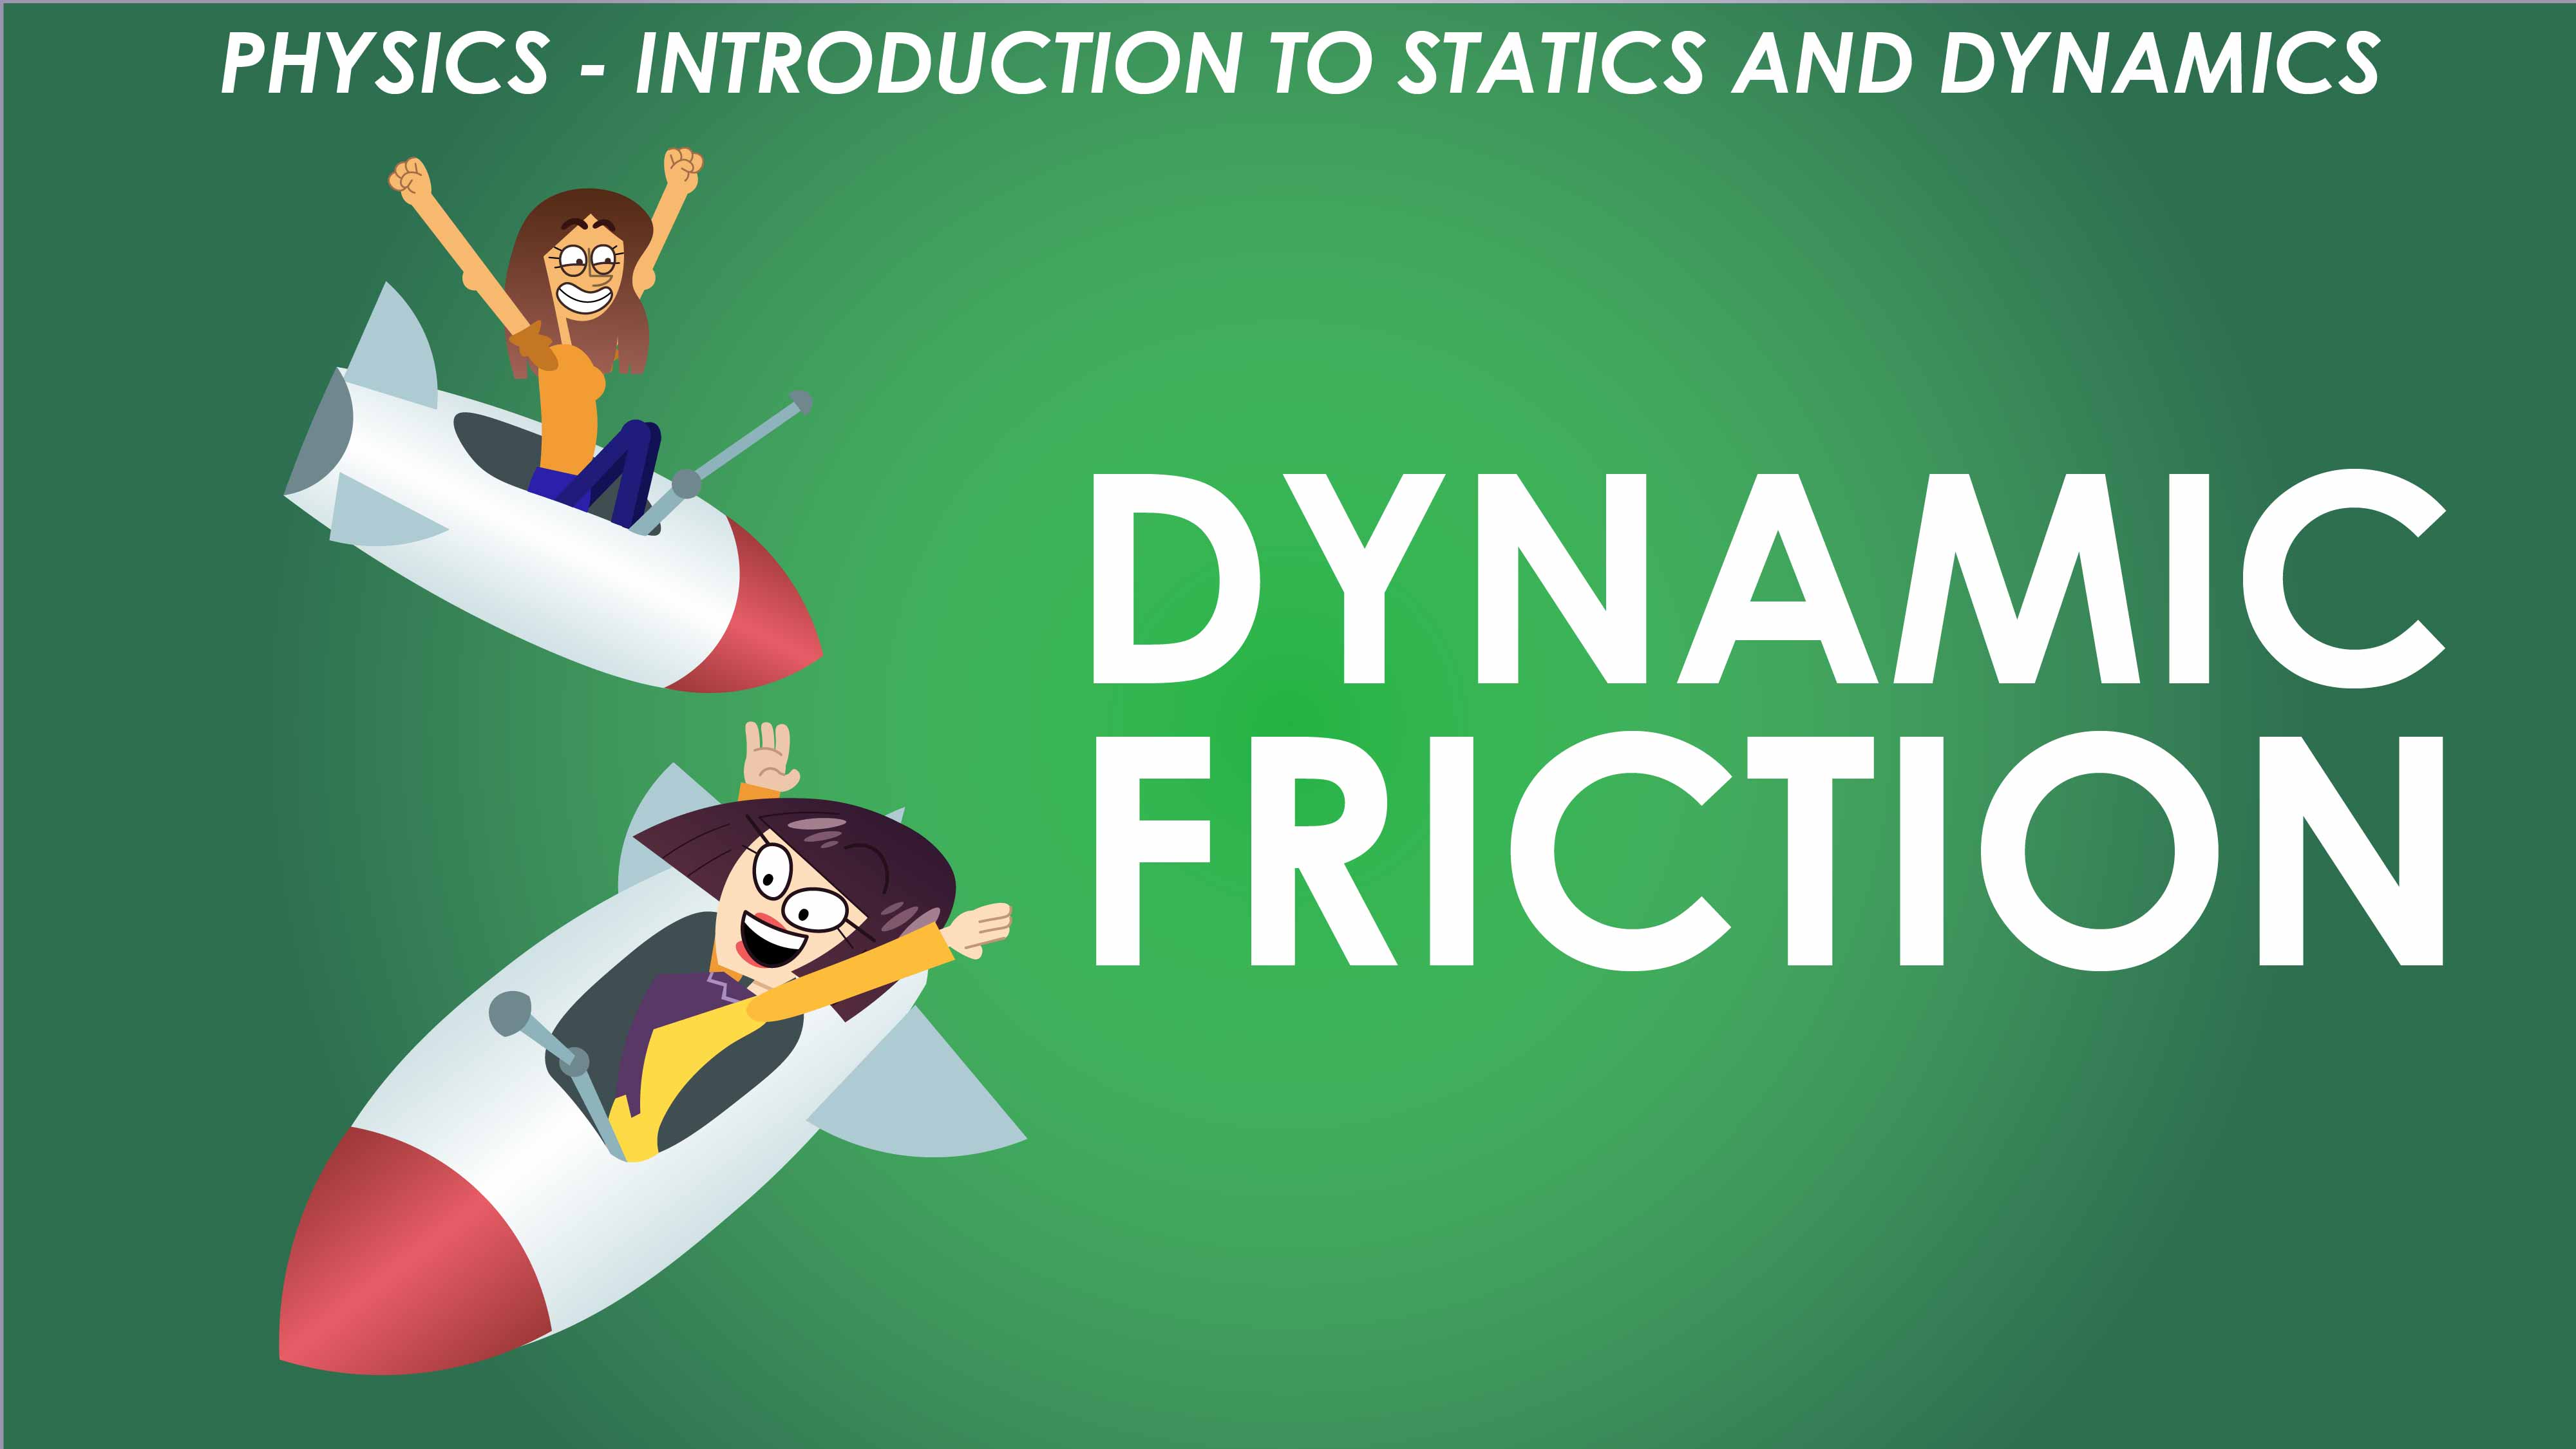 Dynamic Friction - Forces and Newton’s Laws